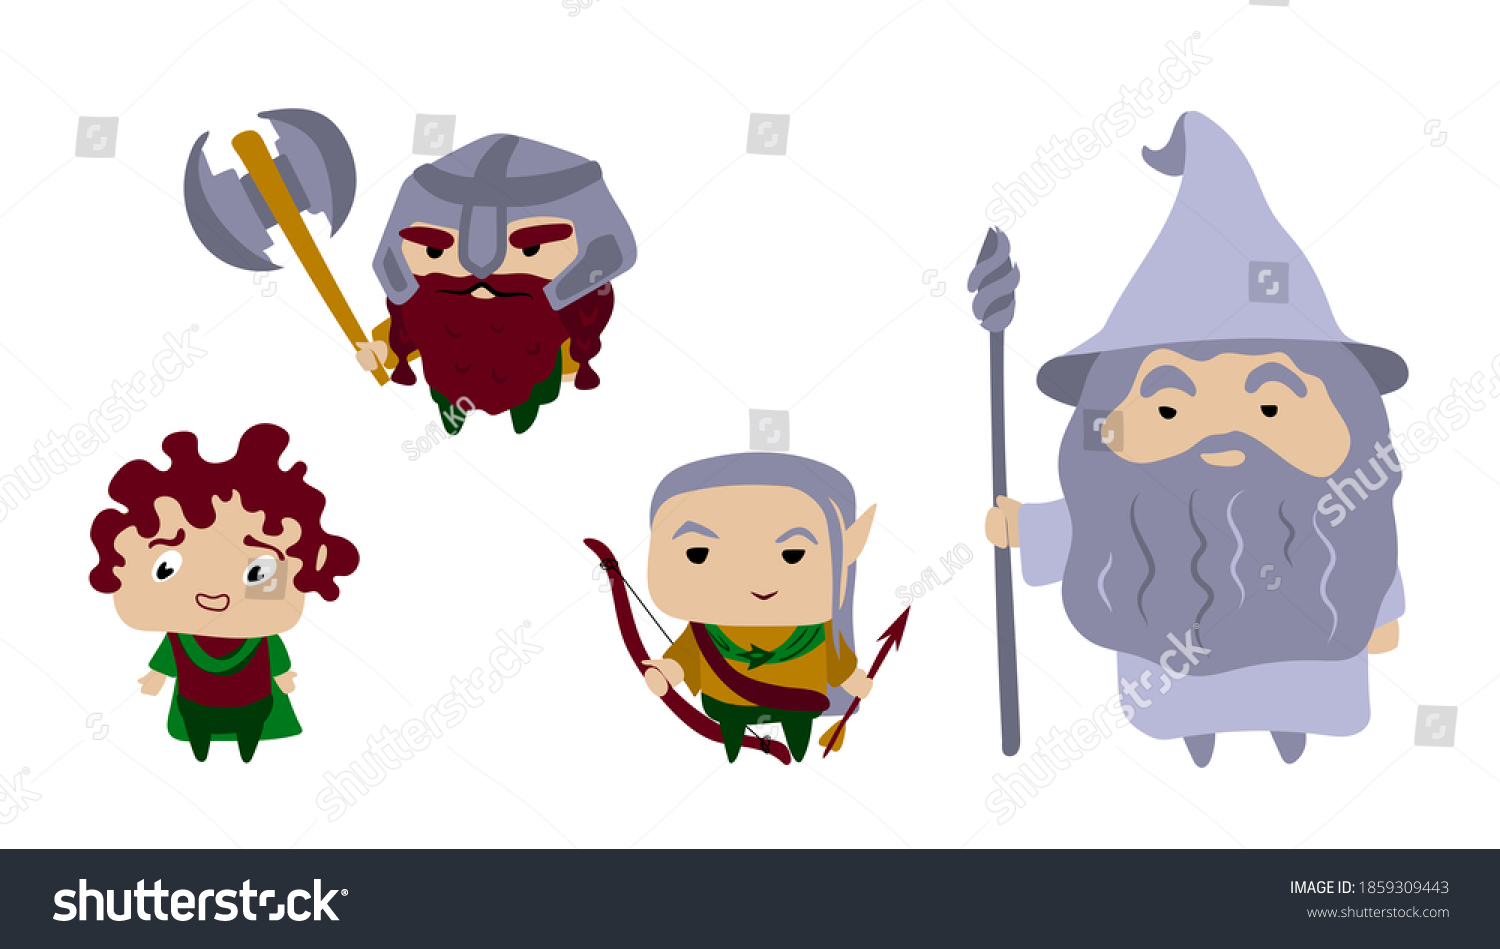 SVG of set. a hobbit, a dwarf with a battle ax, an elf with a bow and arrow, and a wizard in a gray robe with a staff and a hat Cartoon character Vector stock animation White background svg